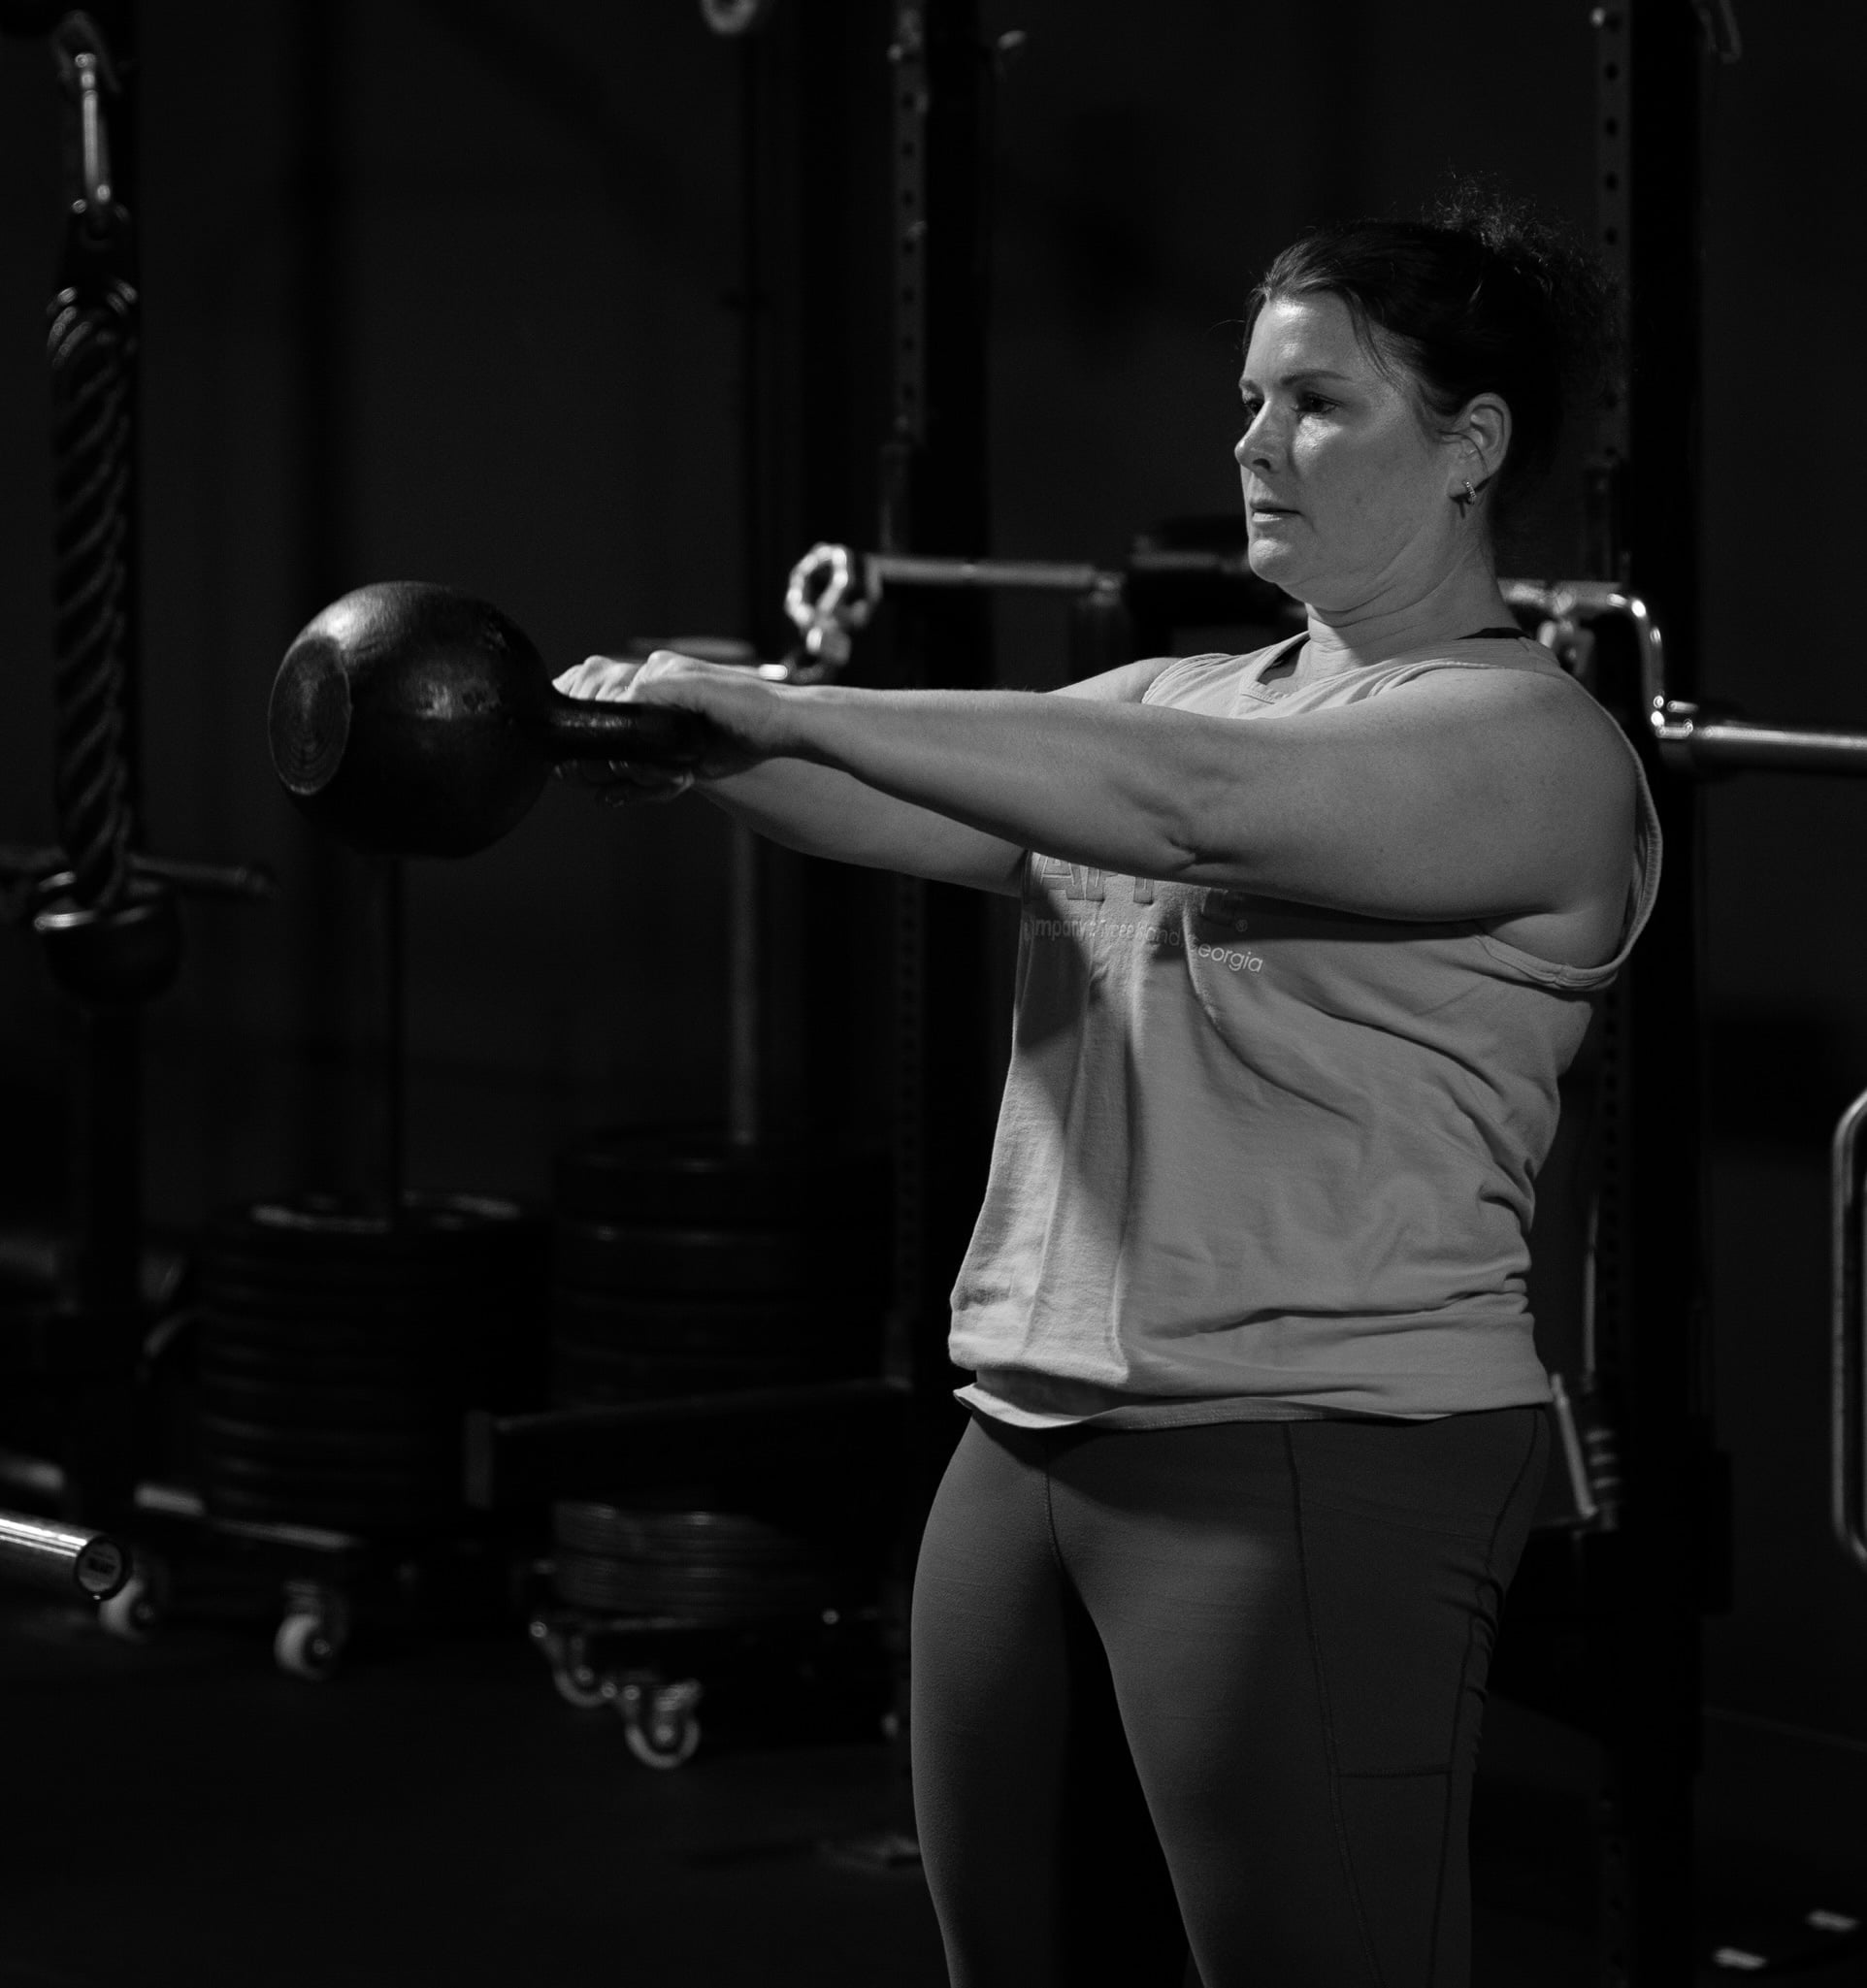 Michelle doing a kettlebell swing at Beyond Strength in Sterling, Virginia